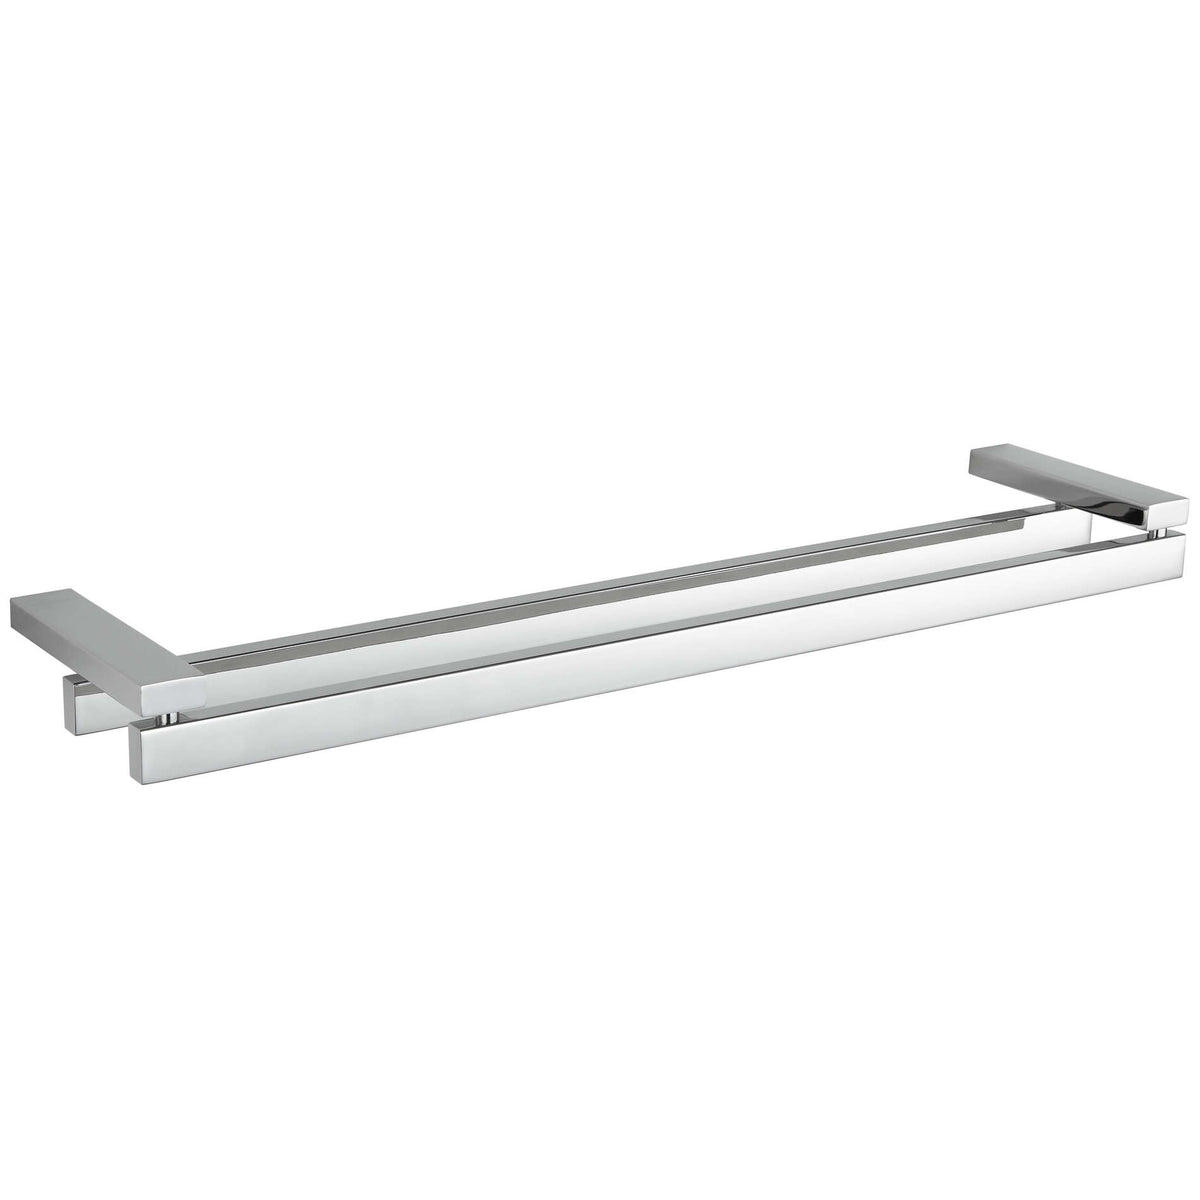 Cortesi Home Enzo Contemporary Stainless Steel Double Towel Bar, Chrome